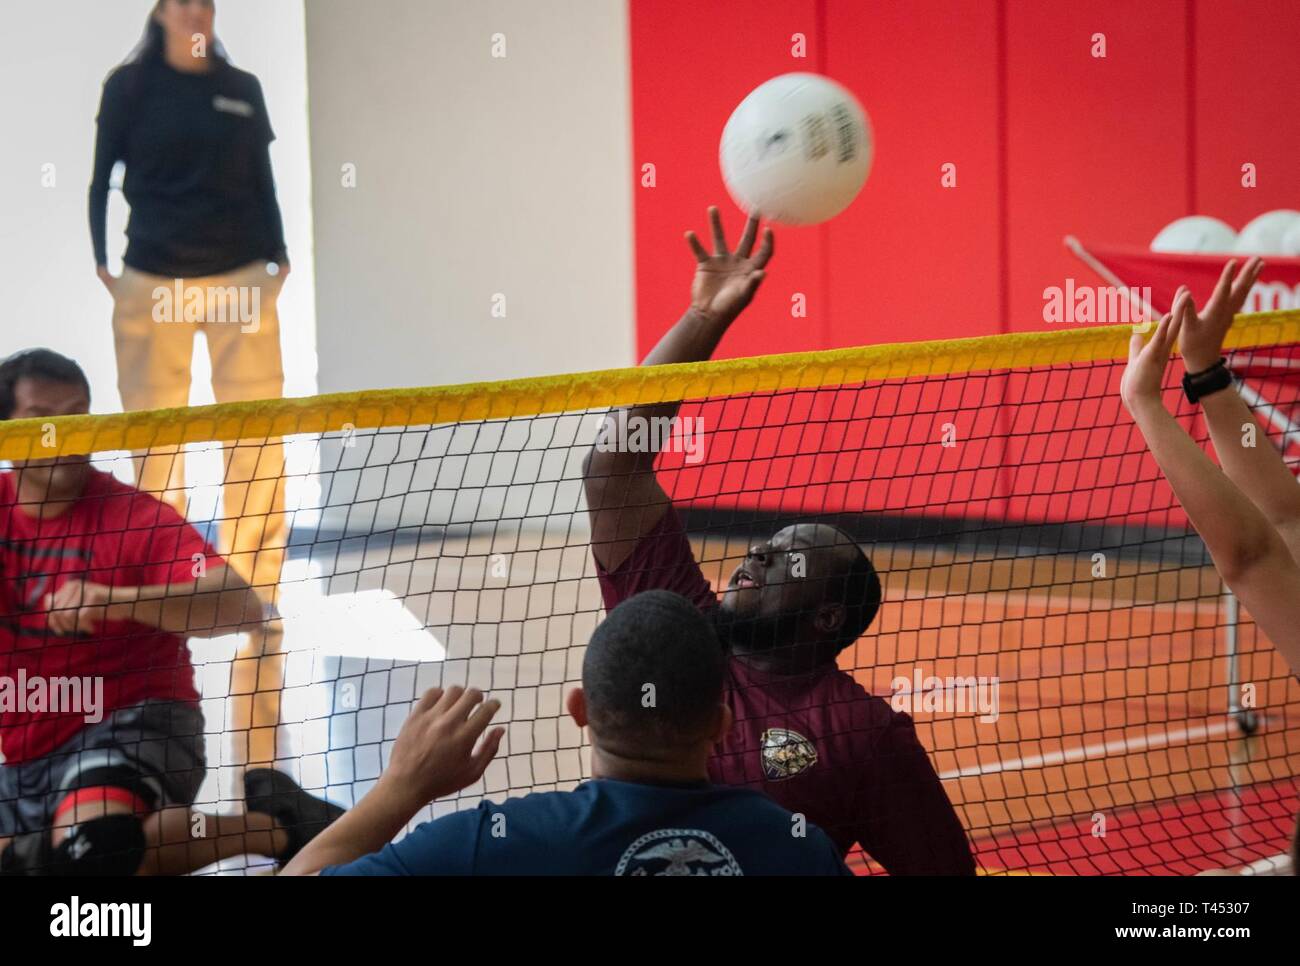 U.S. Marine Corps Lance Cpl. Joseph Meutz hits the ball at a sitting volleyball practice during the 2019 Marine Corps Trials at Marine Corps Base Camp Pendleton, California, Feb. 27. The Marine Corps Trials promotes rehabilitation through adaptive sports participation and serves as the primary venue to select Marine Corps participants for the DoD Warrior Games. (Official U.S. Marine Corps Stock Photo